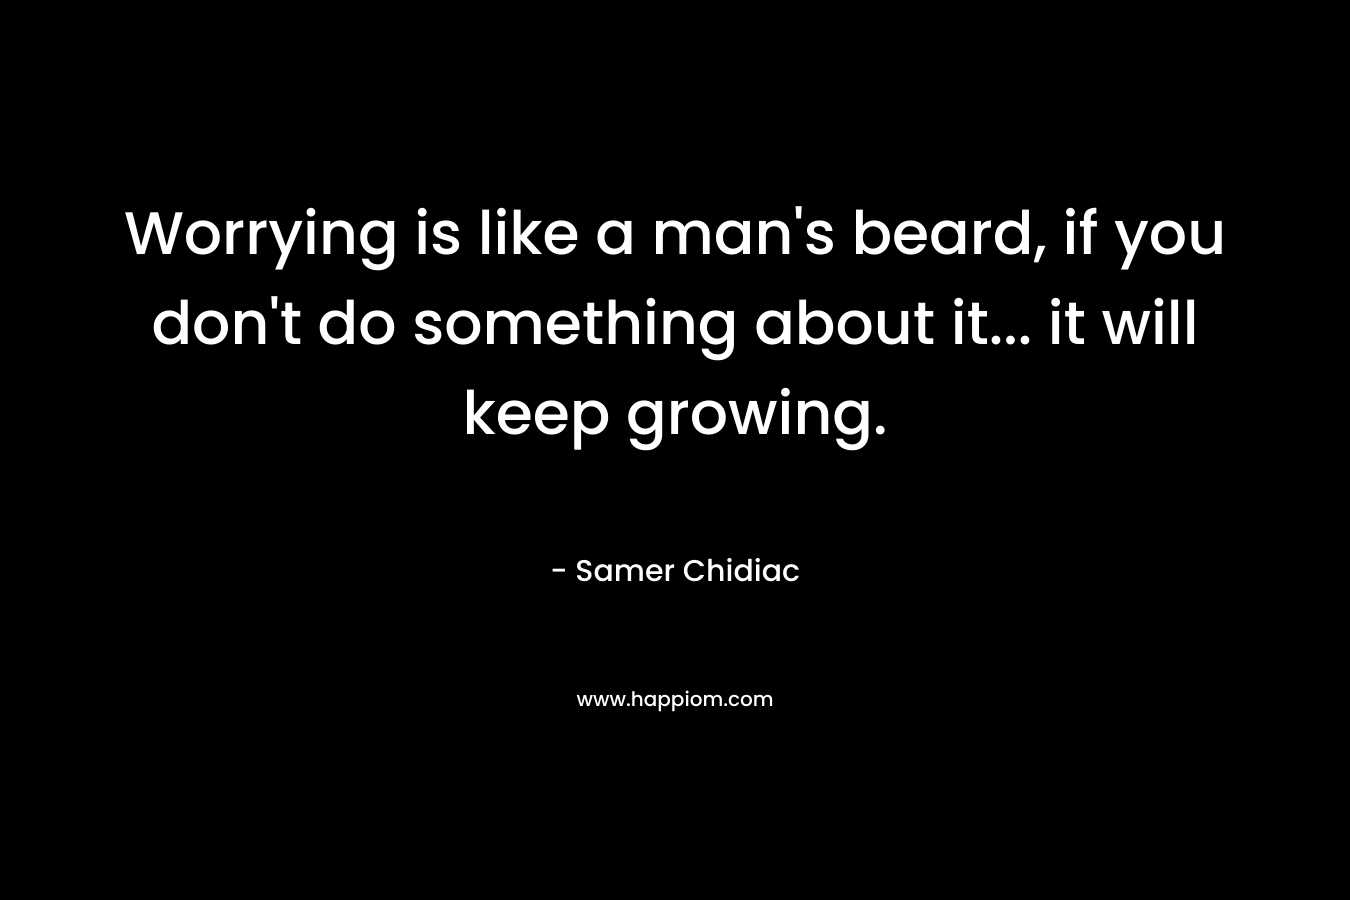 Worrying is like a man’s beard, if you don’t do something about it… it will keep growing. – Samer Chidiac